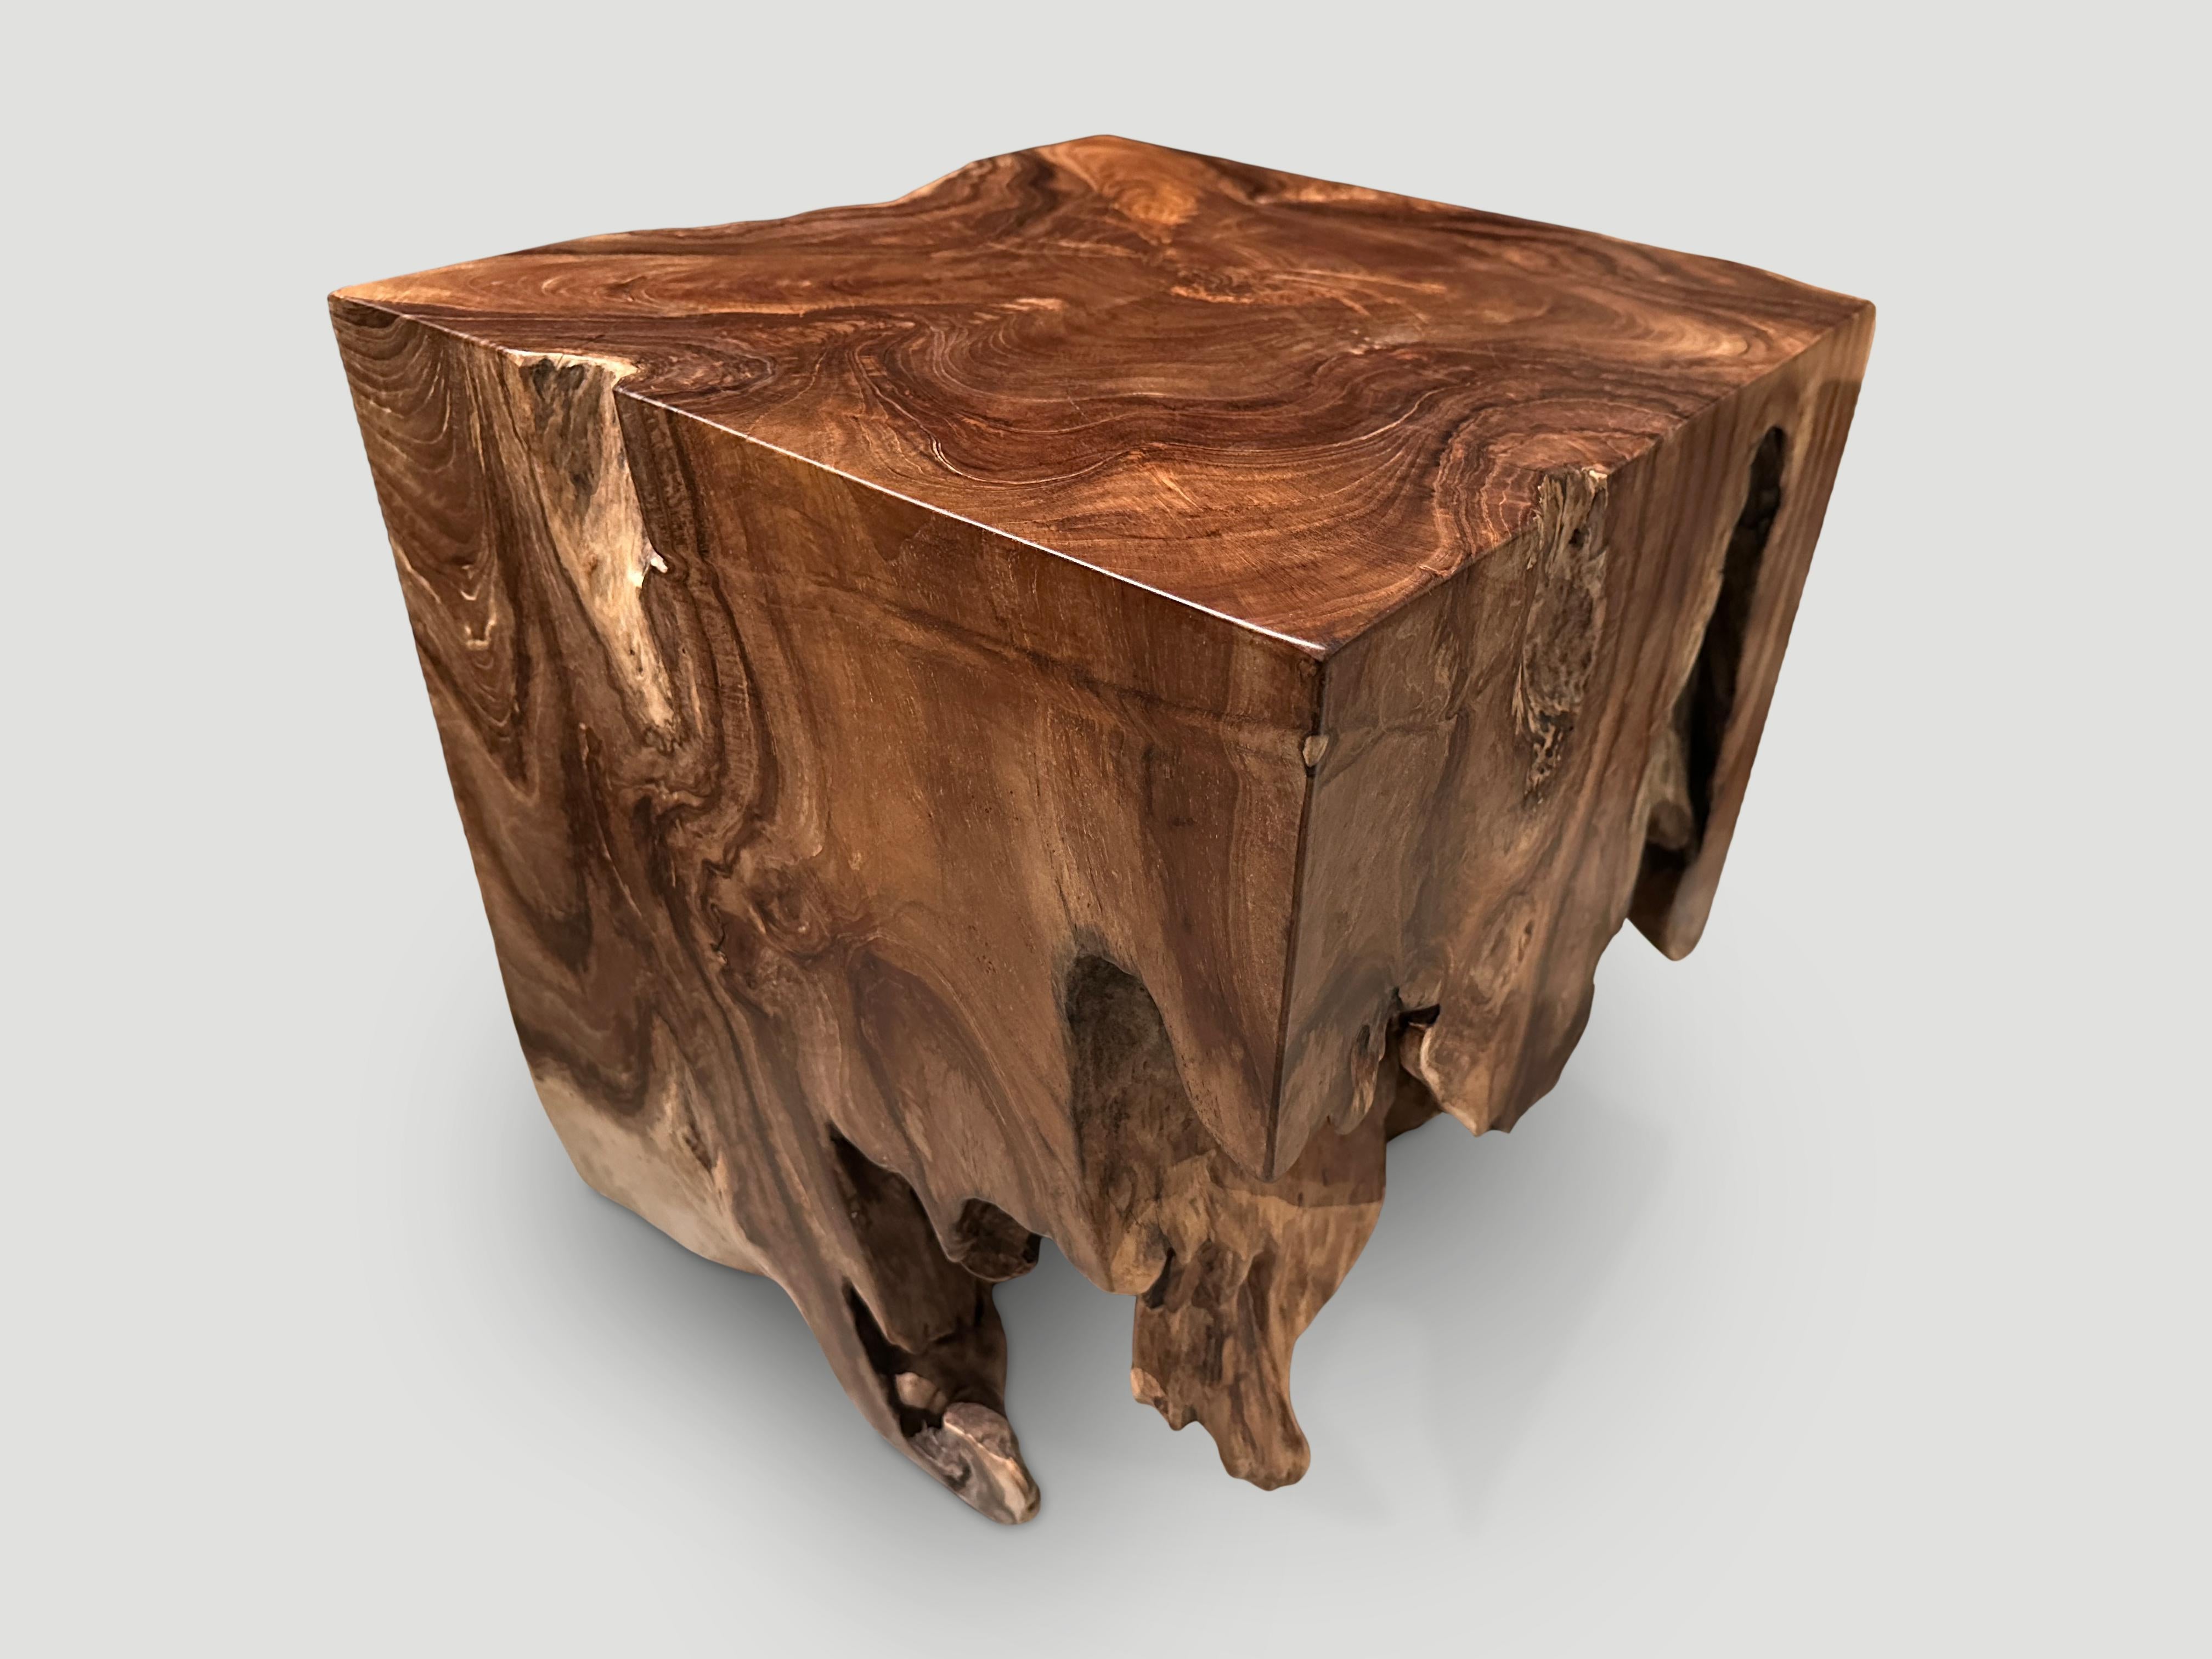 Contemporary Andrianna Shamaris Sculptural Teak Wood Side Table For Sale